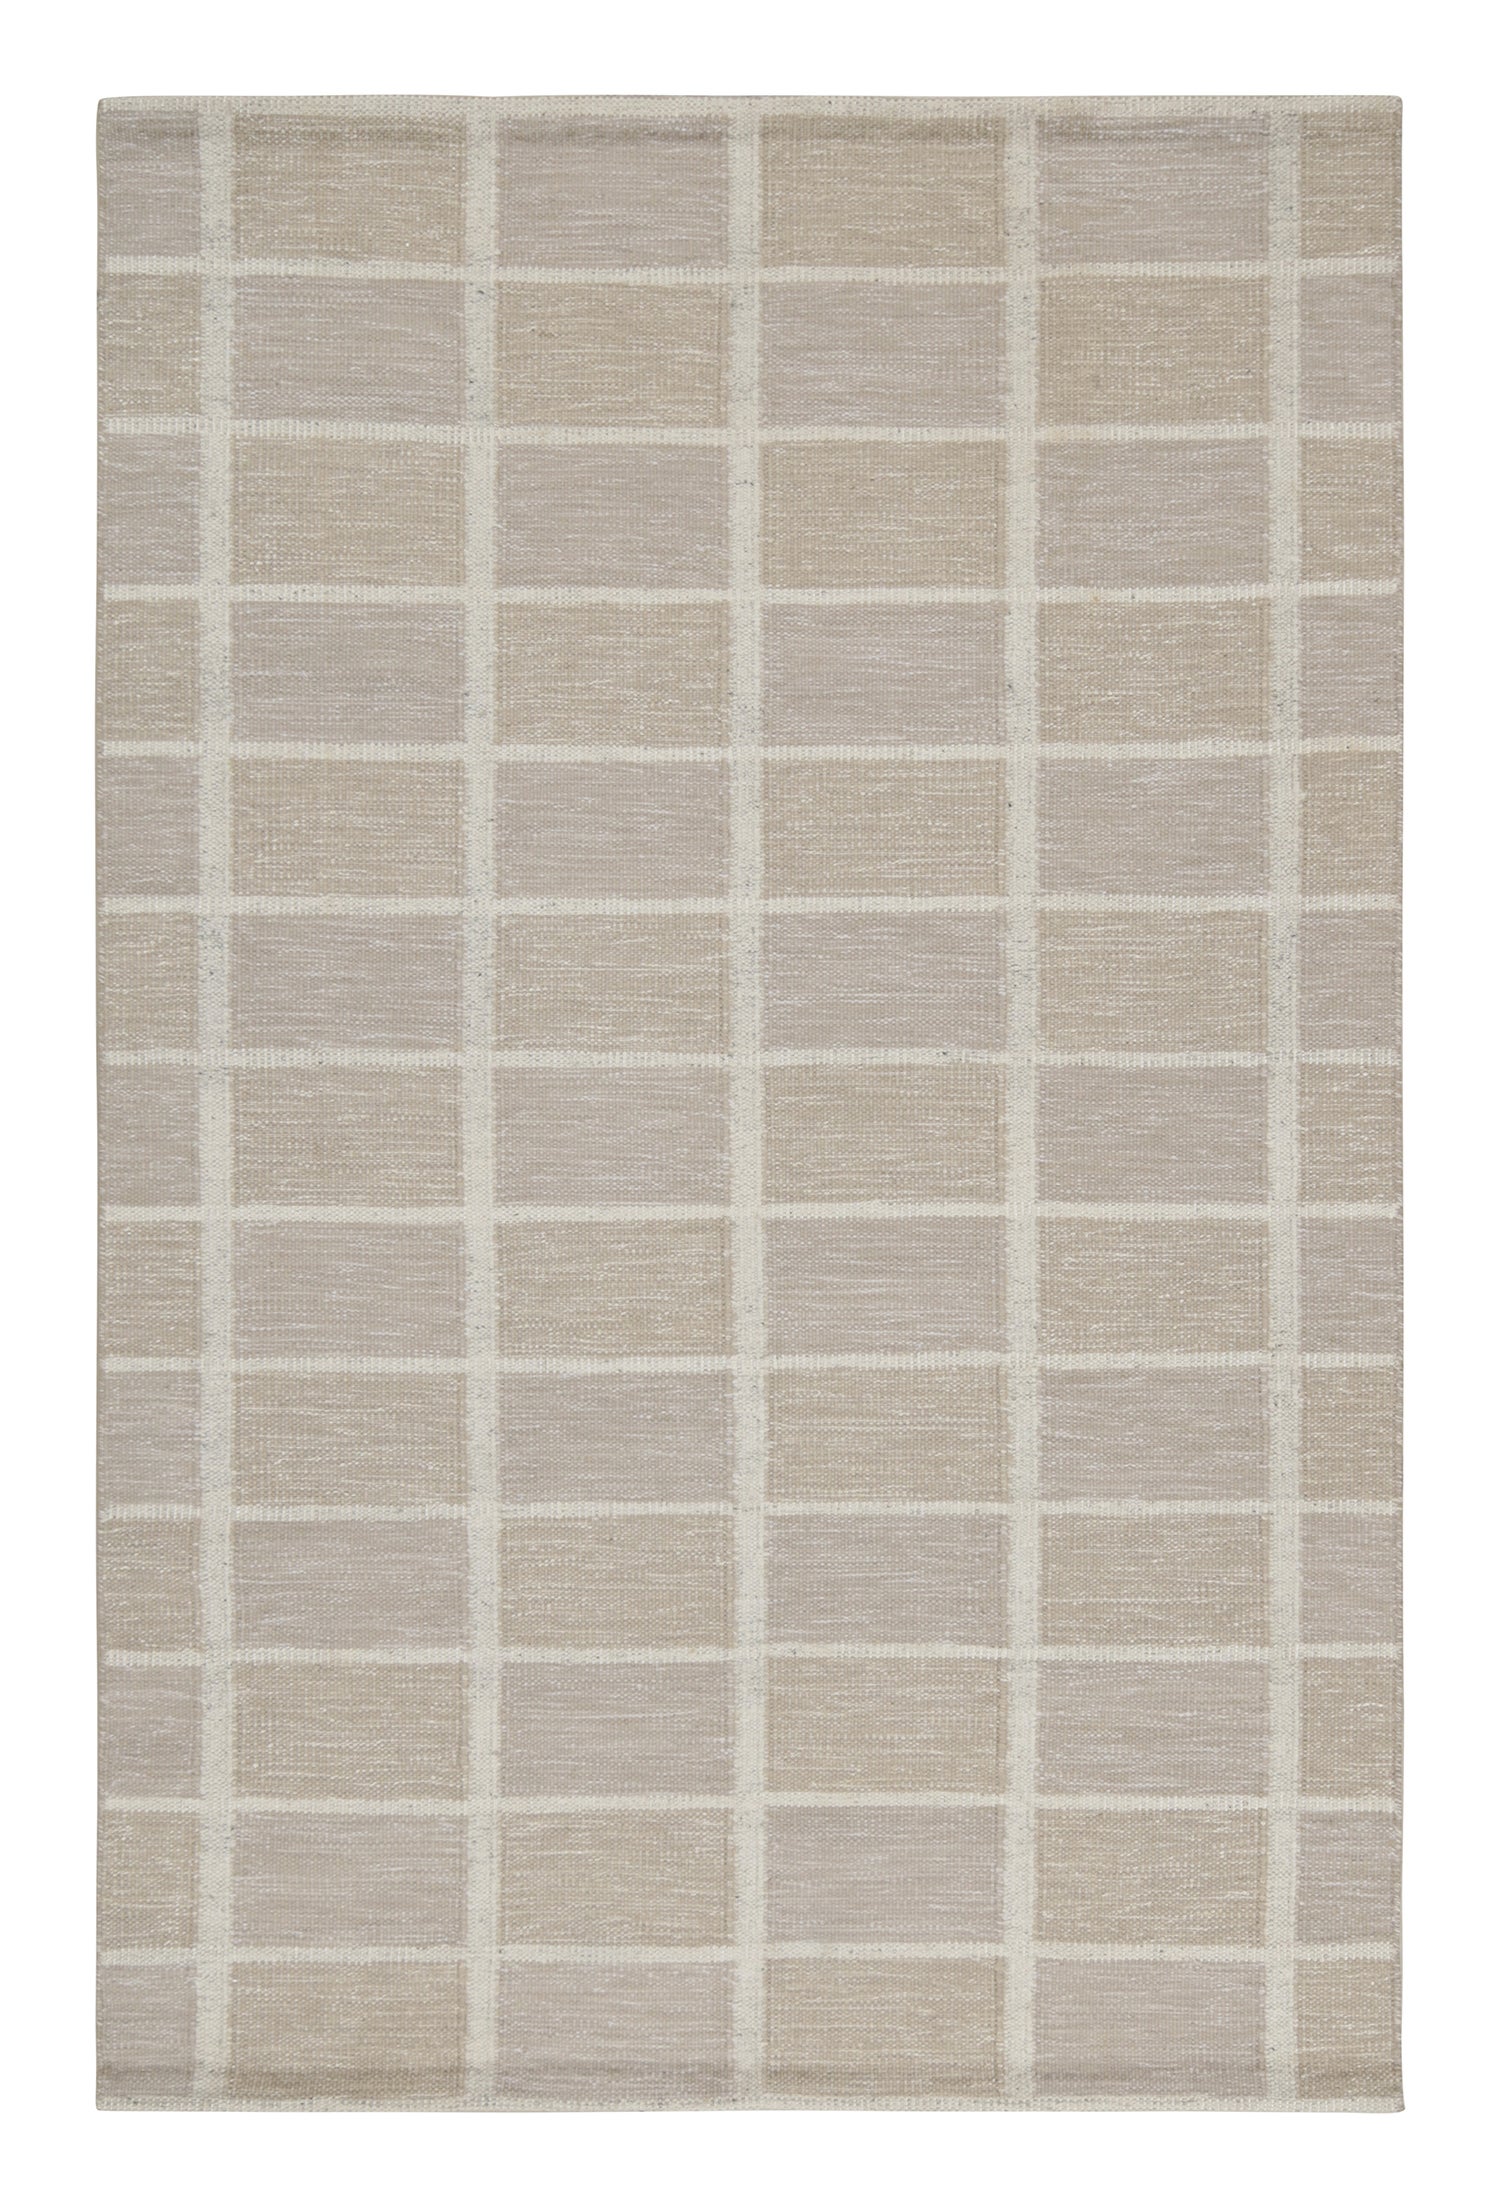 Rug & Kilim’s Scandinavian Kilim Rug in Taupe and White Geometric Pattern For Sale